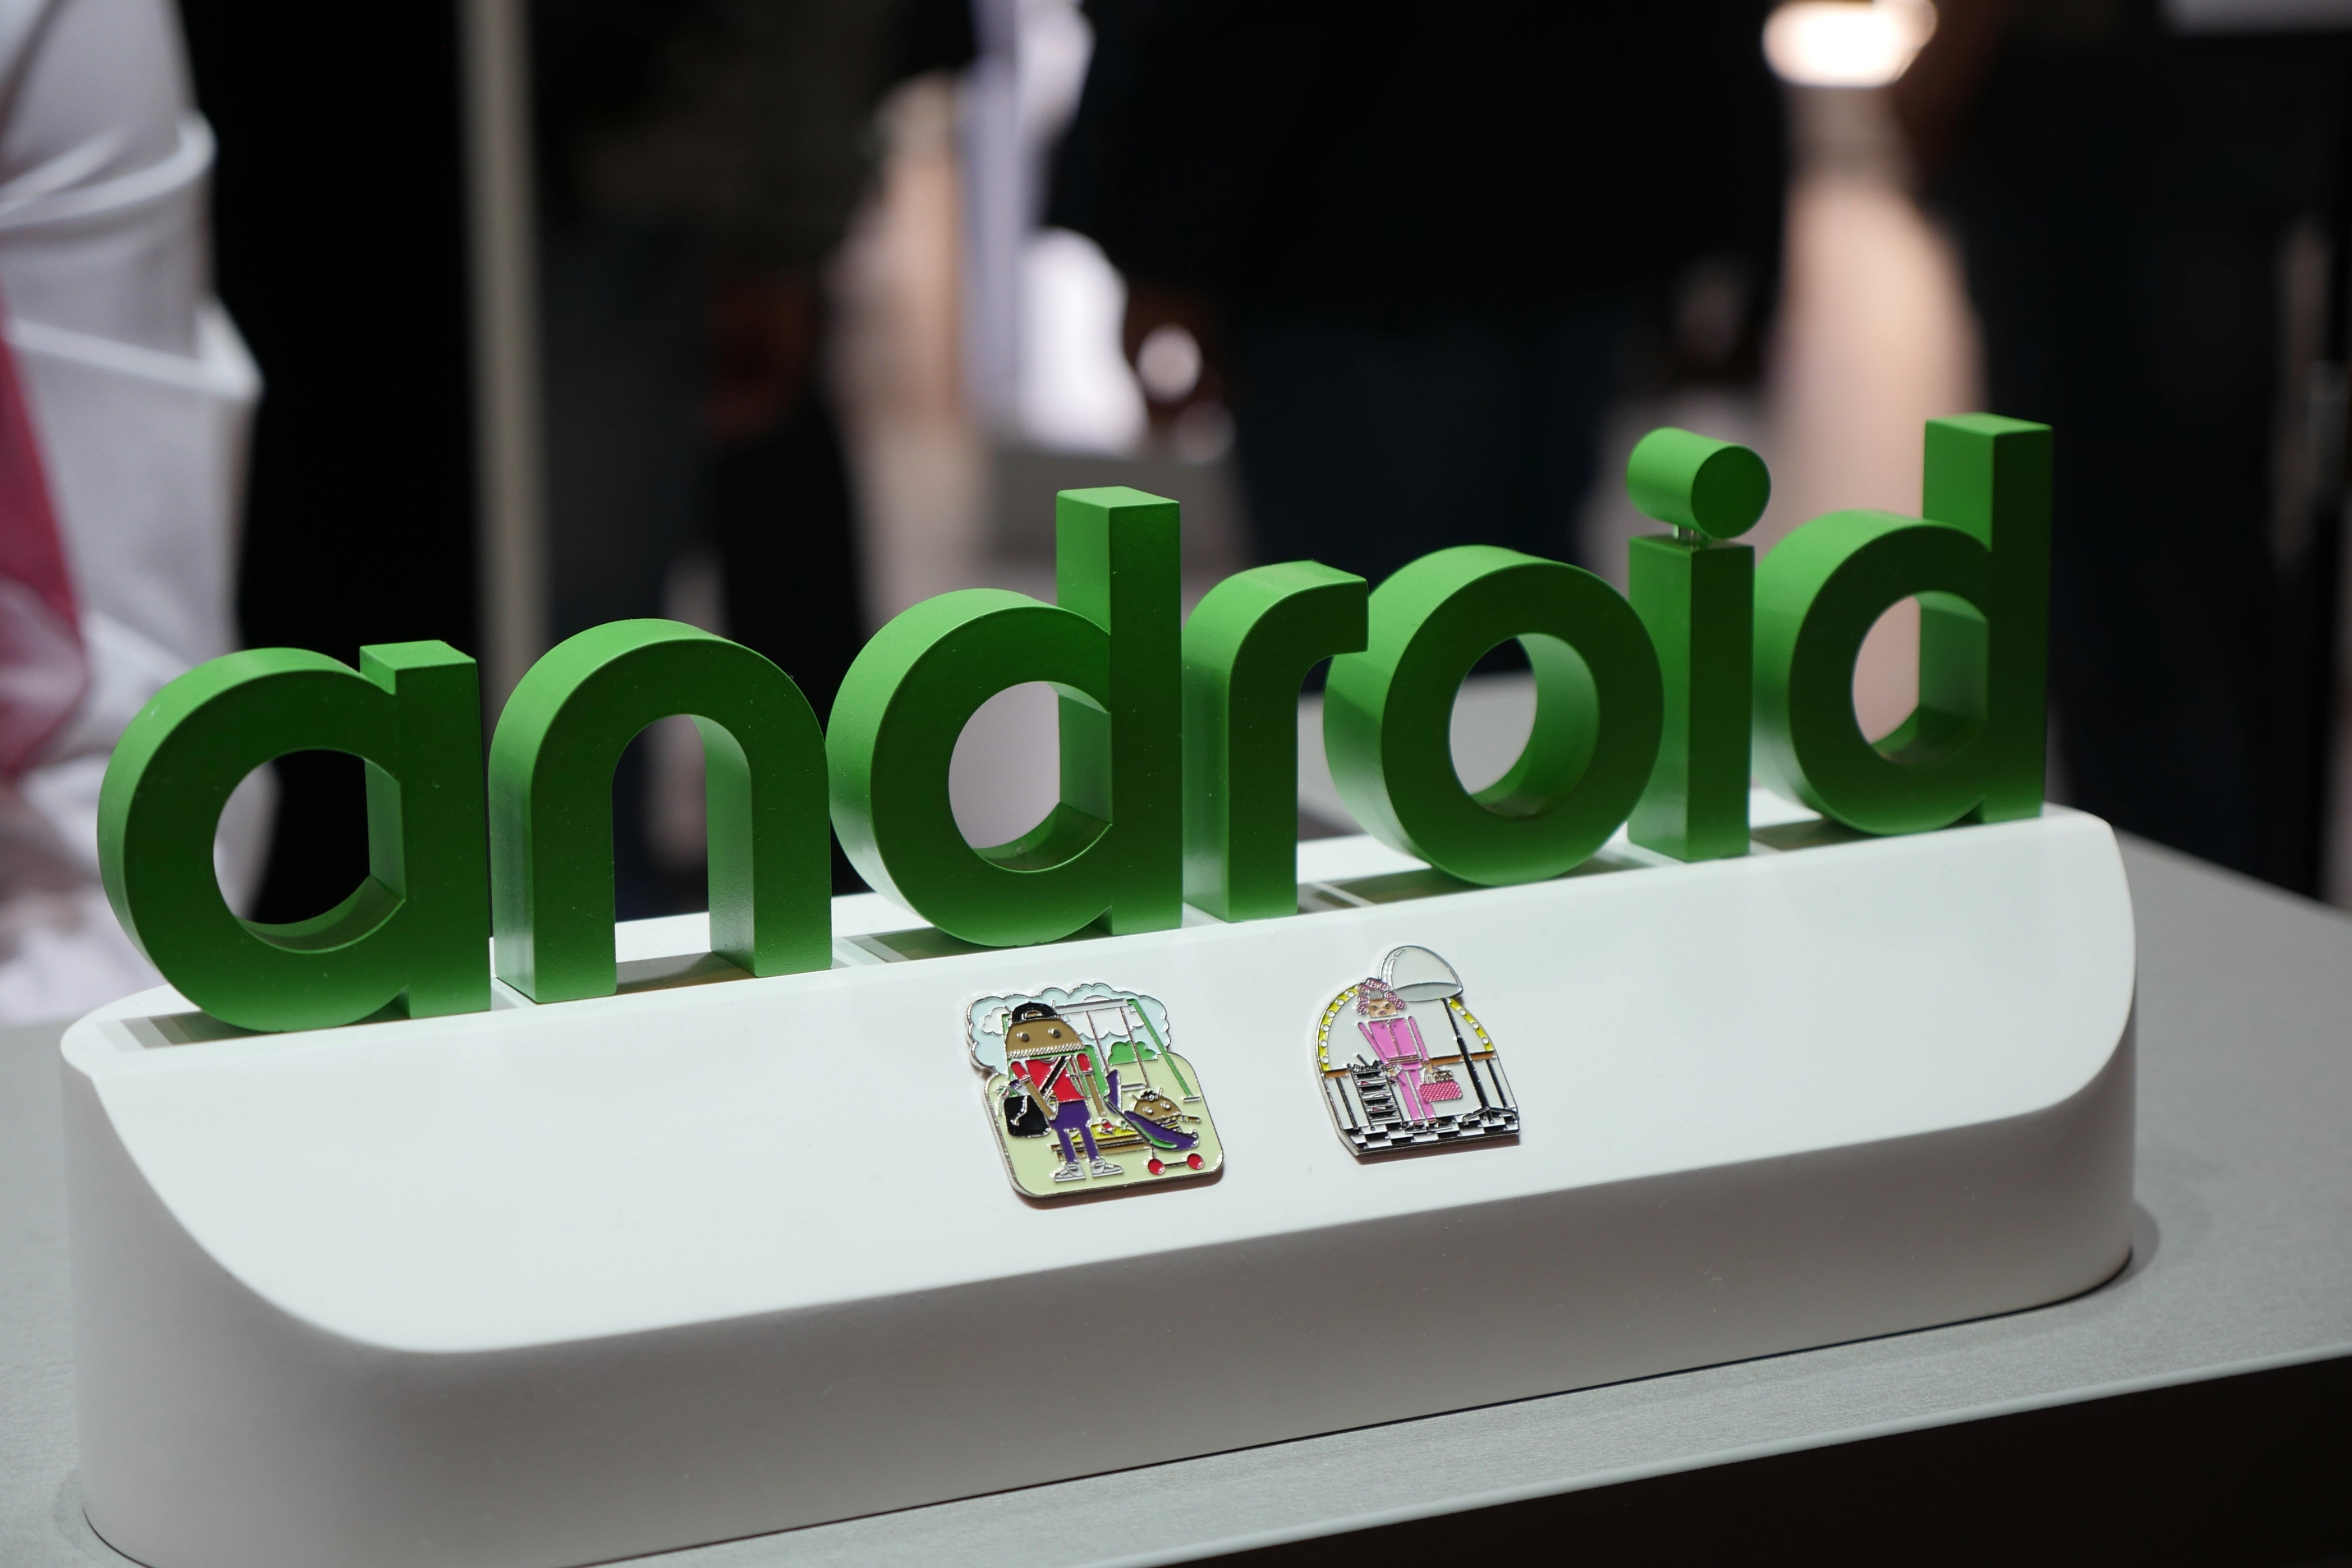 Image credit – PhoneArena – Phoneageddon: Is your Android smartphone doomed after updates end?